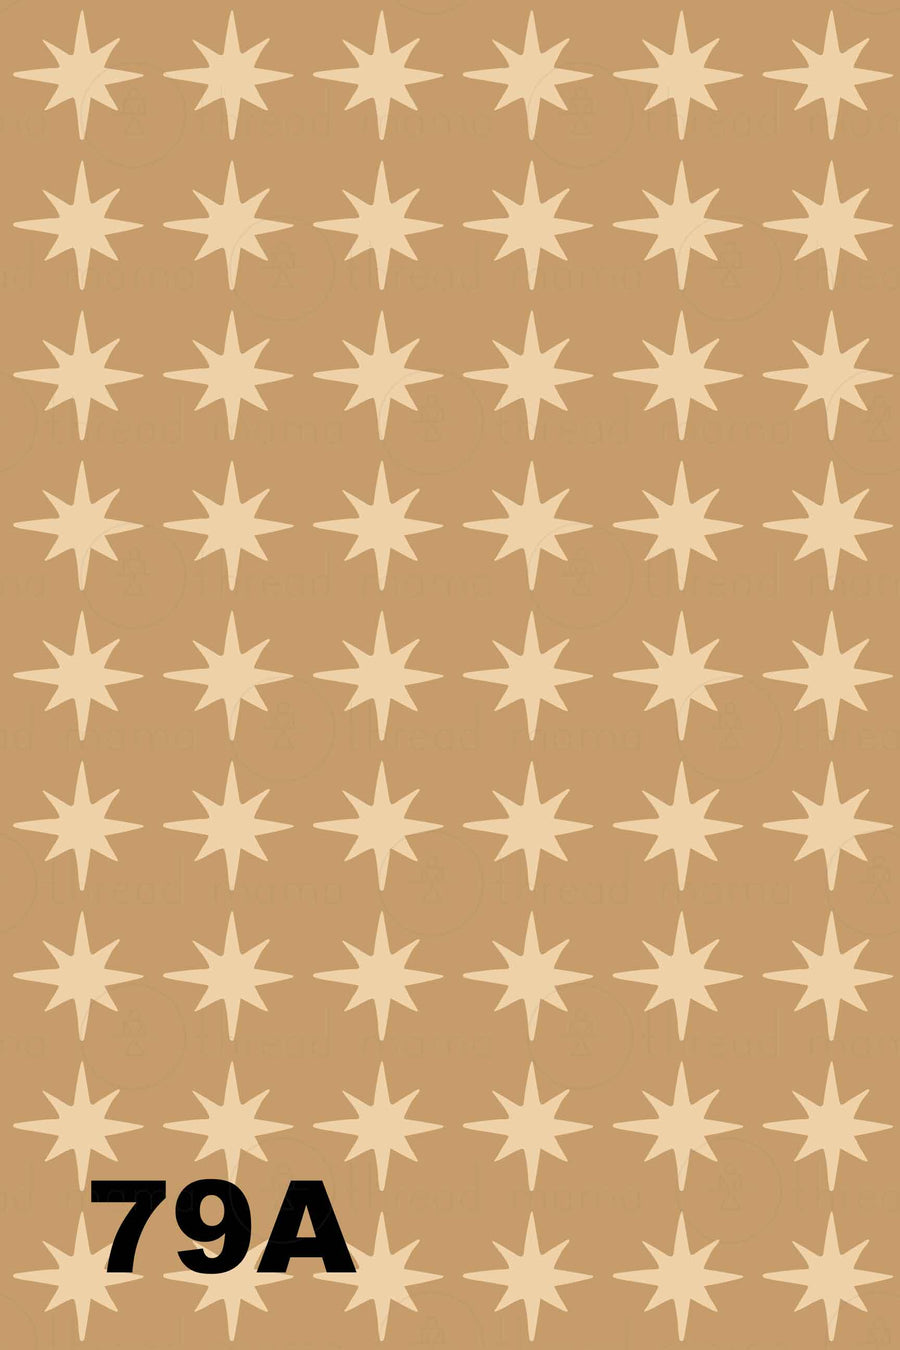 Background Pattern #79 (Printable Poster)